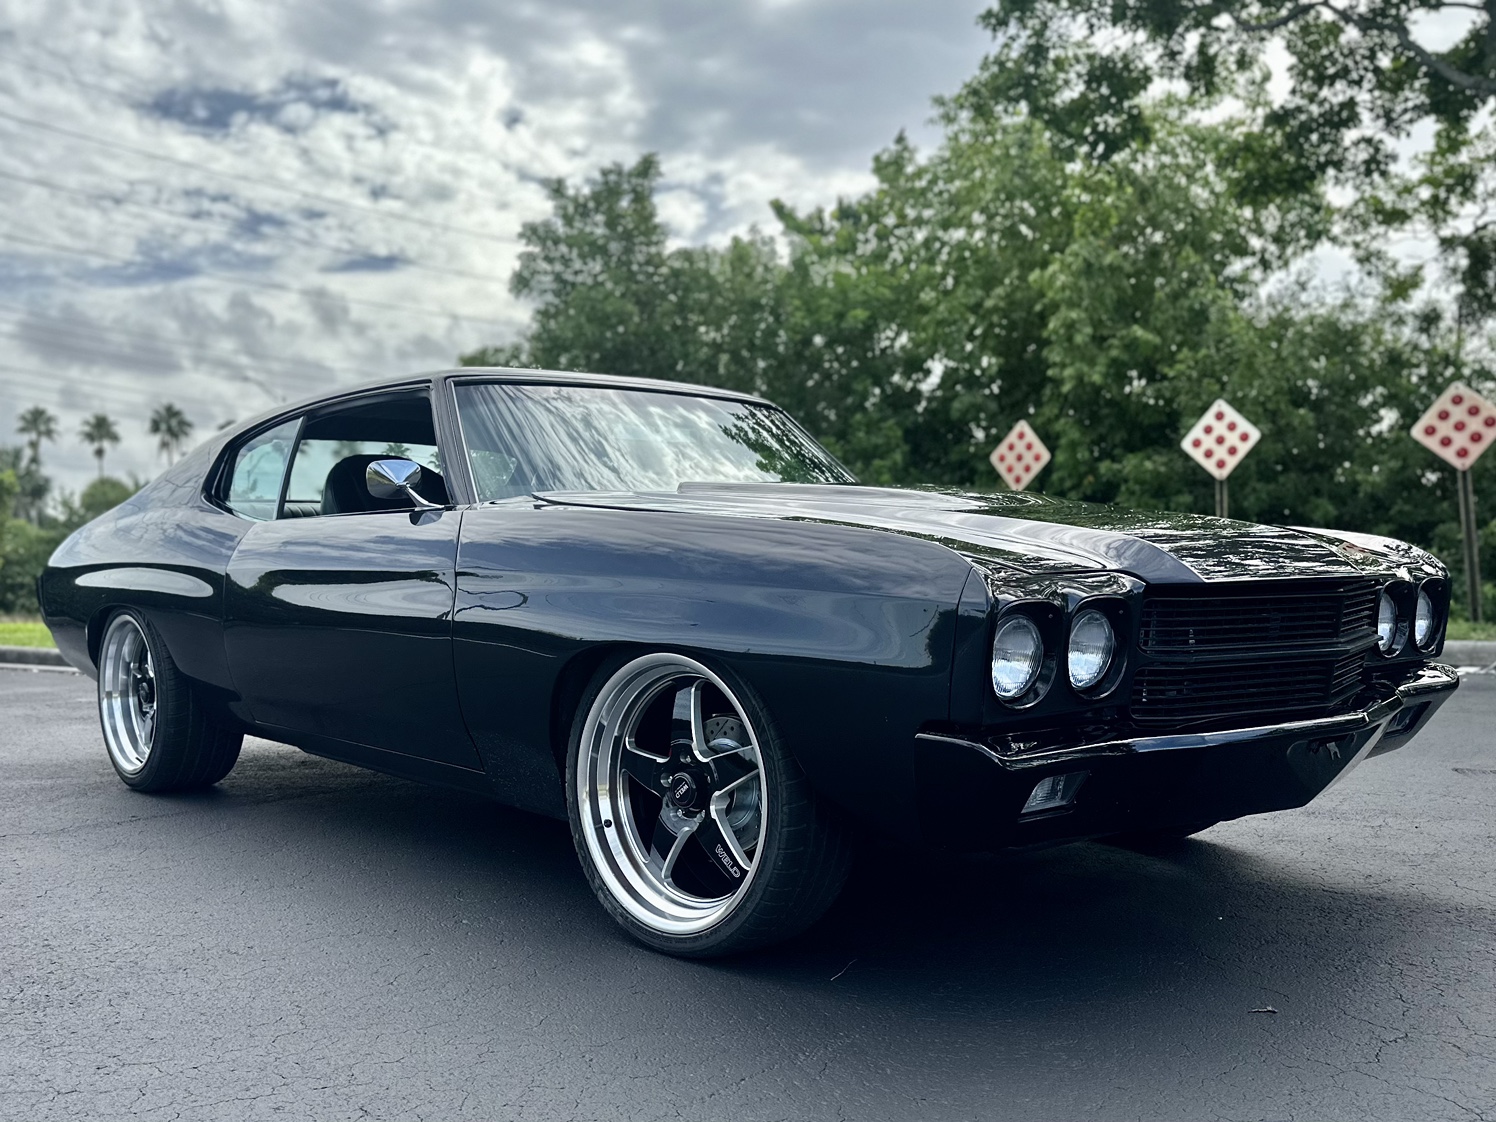 Immaculate, Must-See 1970 Pro Touring Chevelle